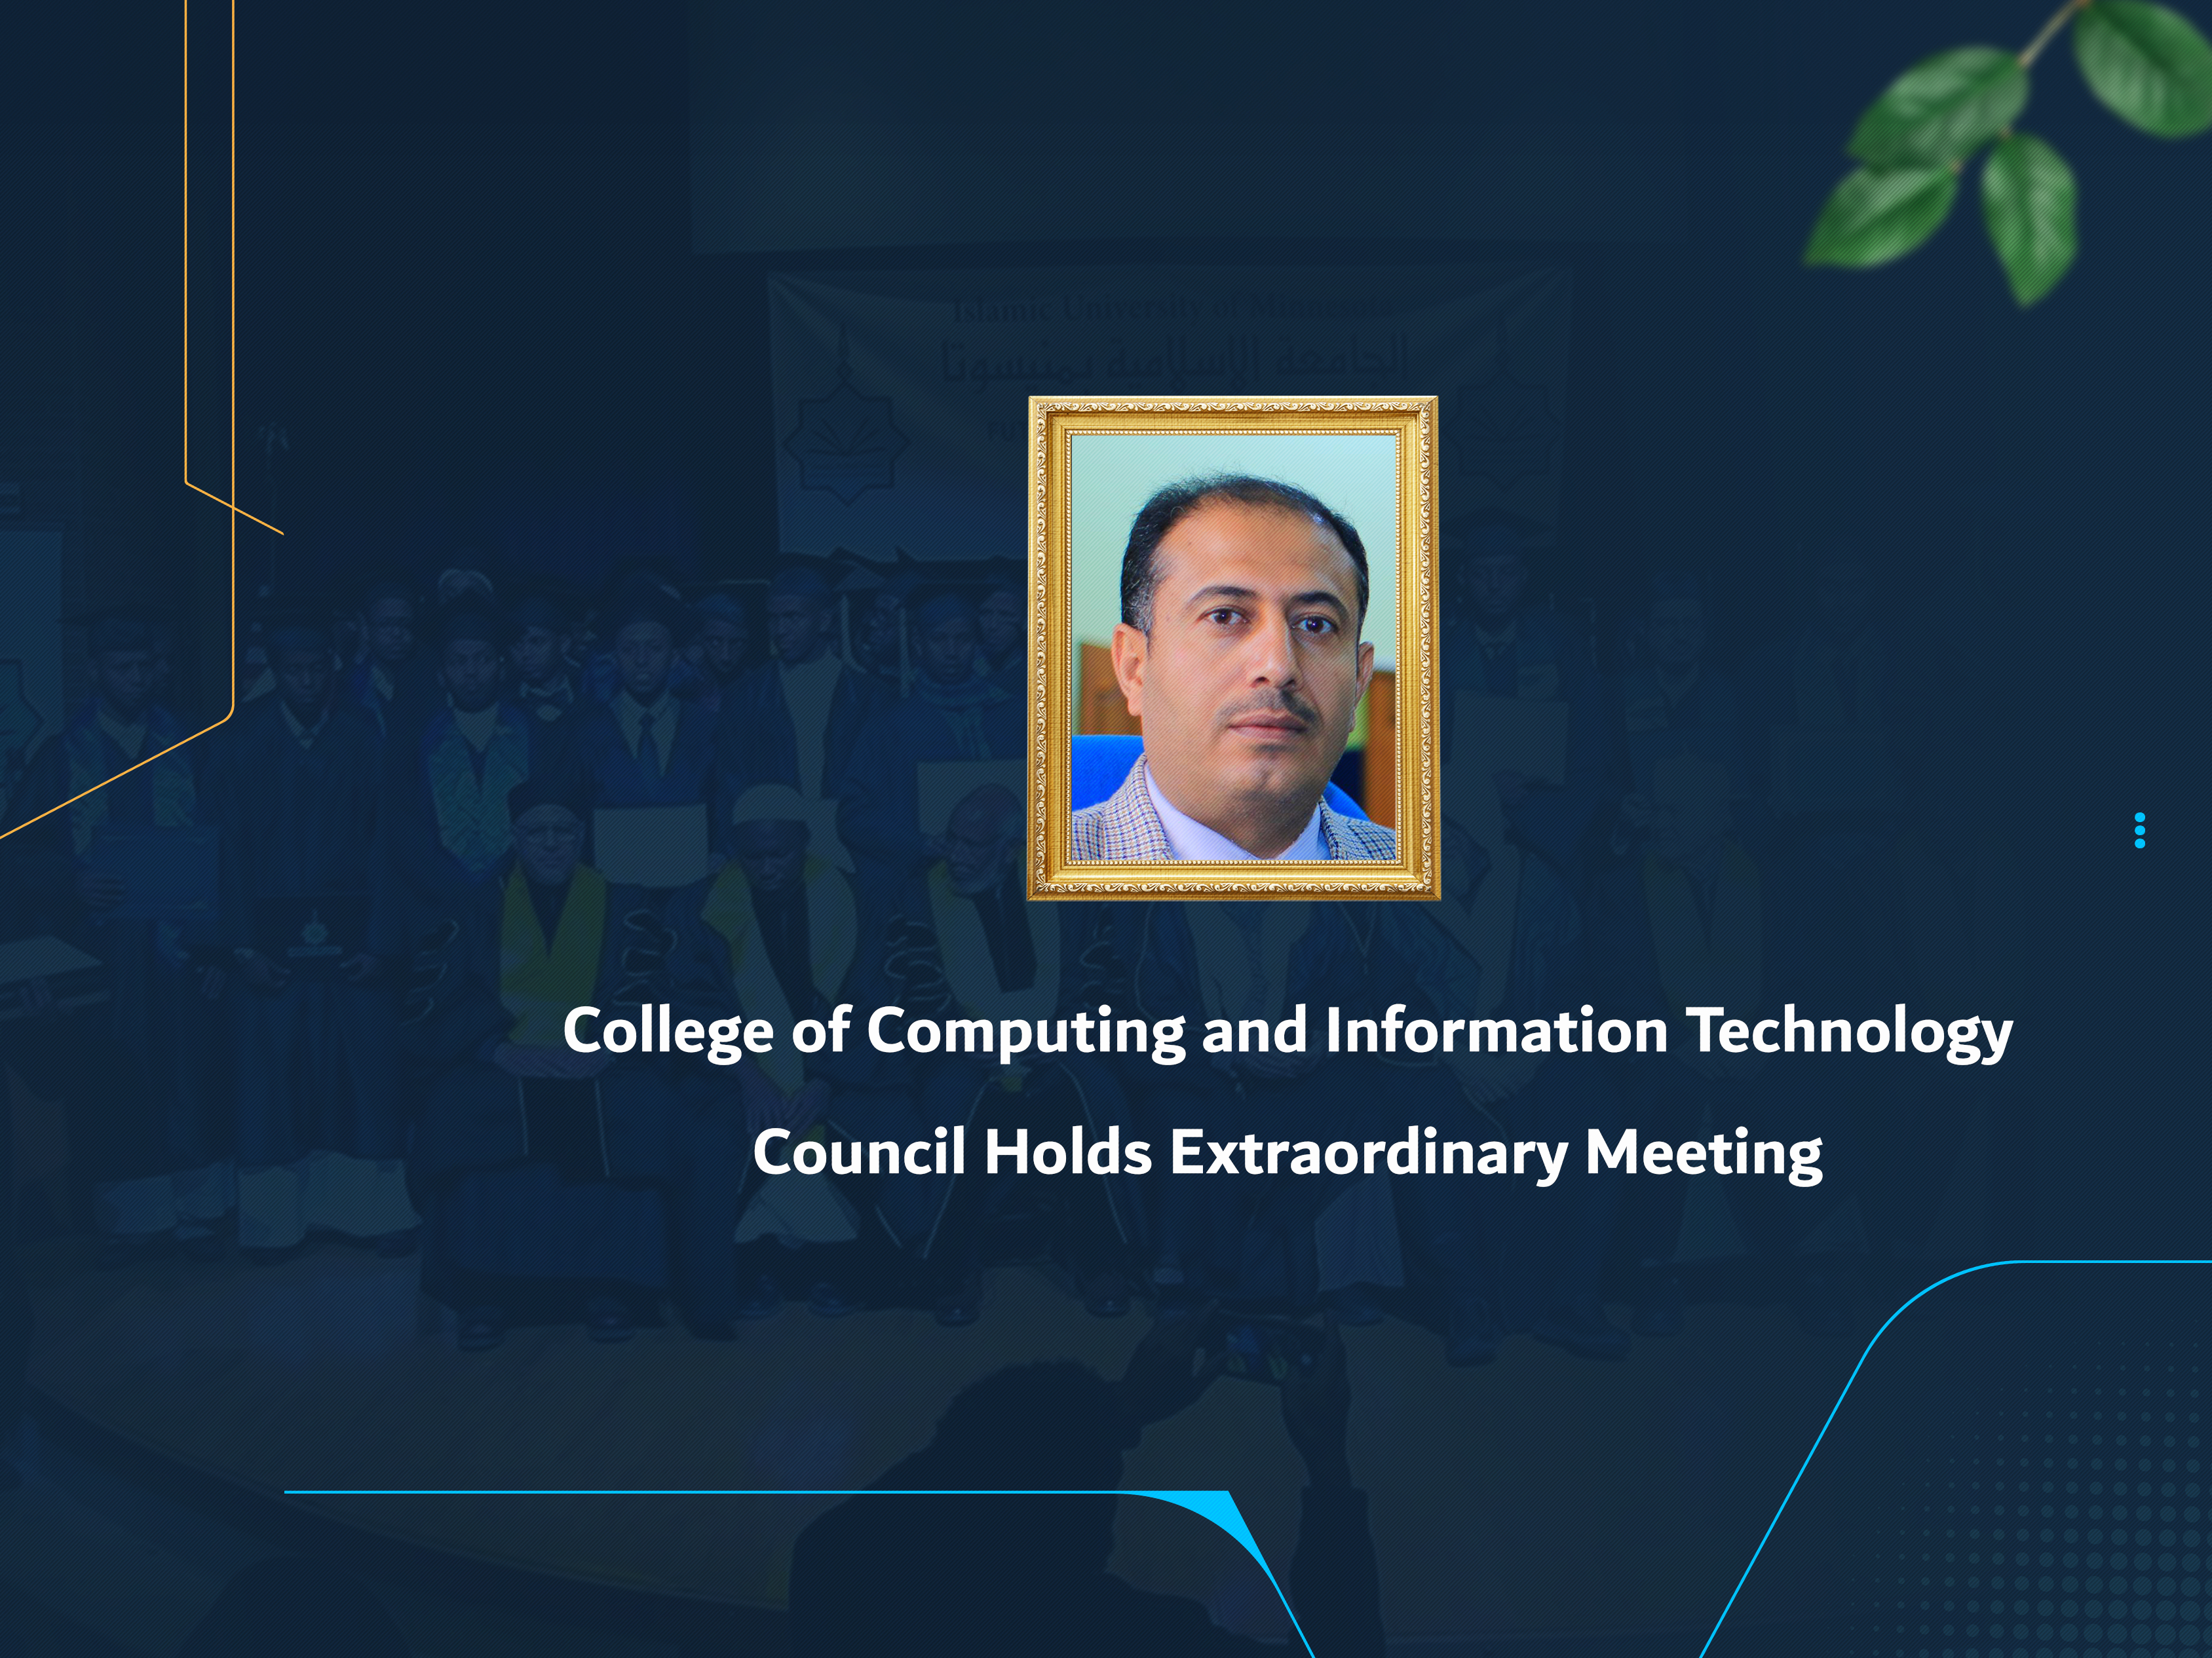 College of Computing and Information Technology Council Holds Extraordinary Meeting